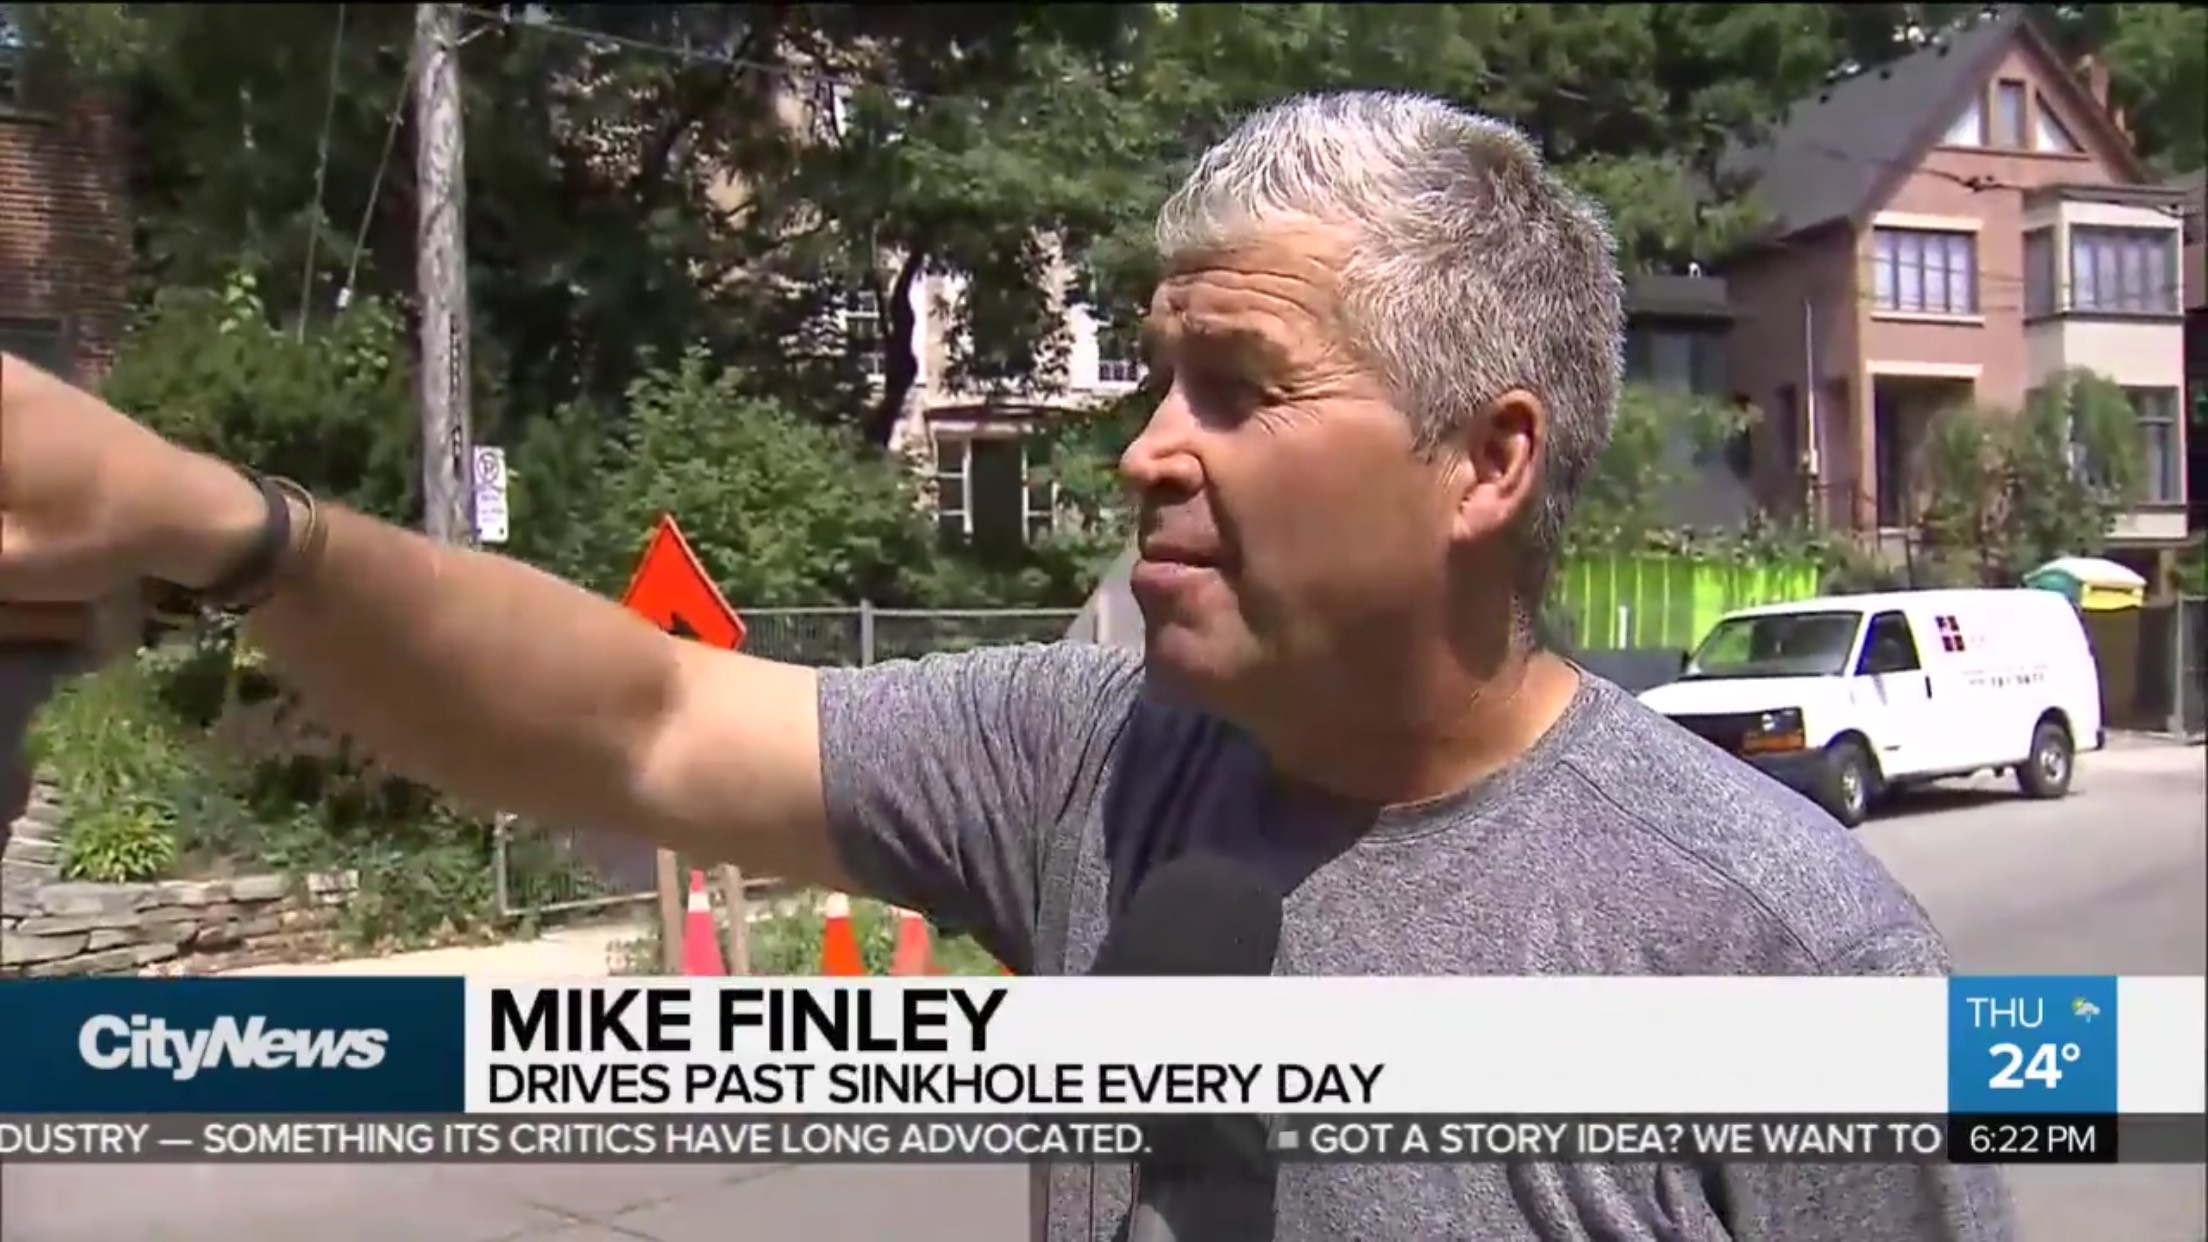 Mike Finley: Drives Past Sinkhole Every Day